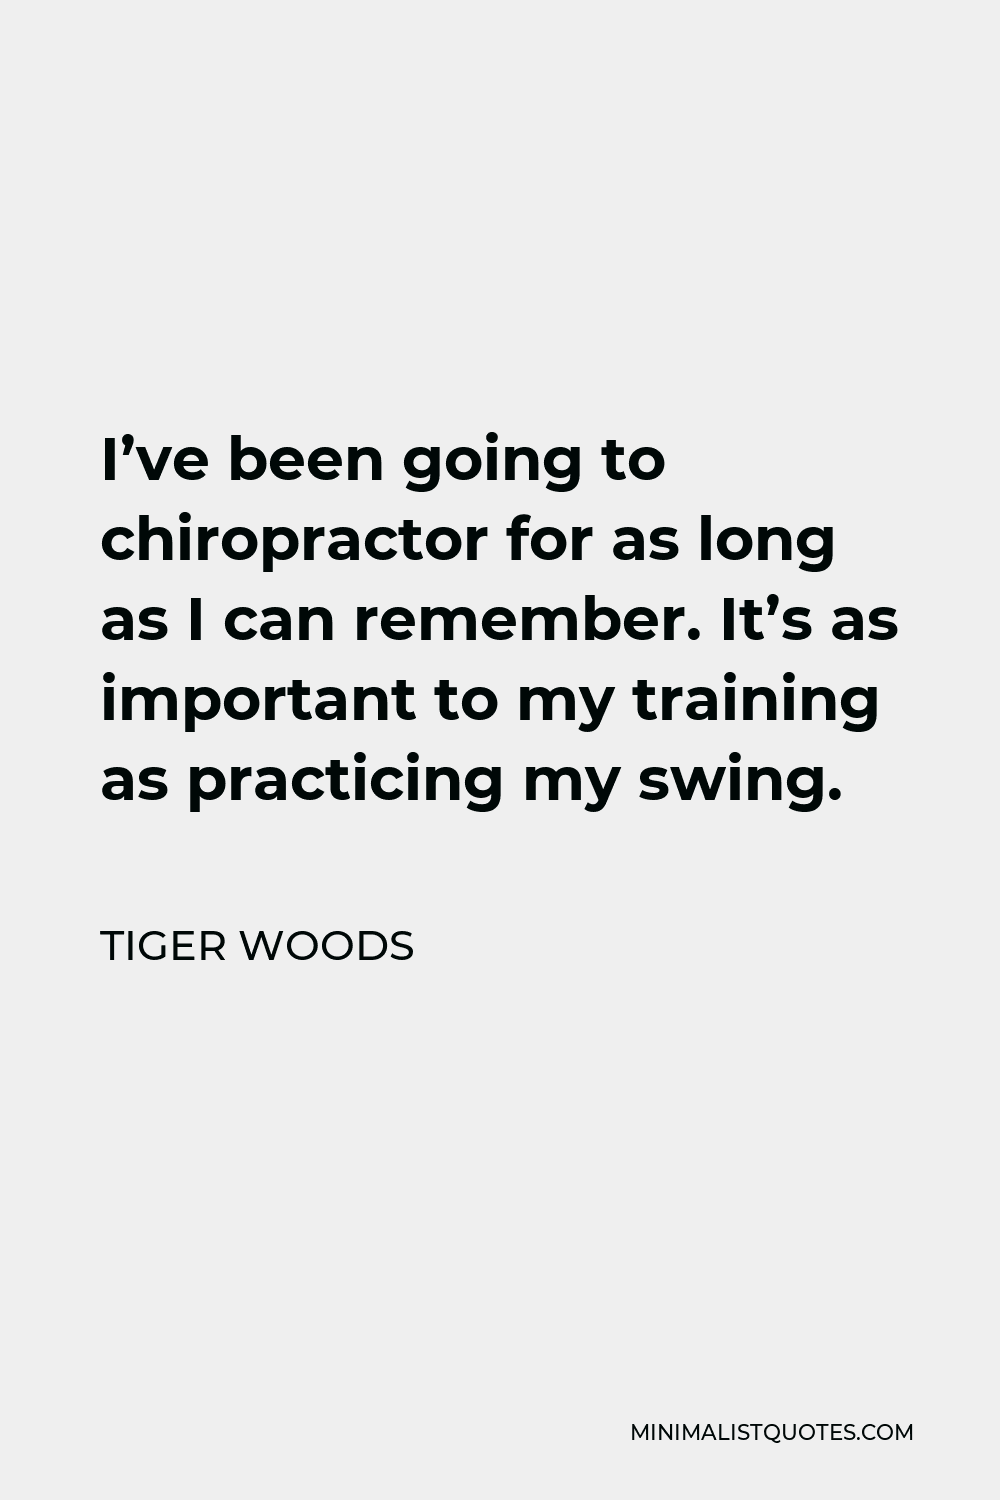 Tiger Woods Quote - I’ve been going to chiropractor for as long as I can remember. It’s as important to my training as practicing my swing.